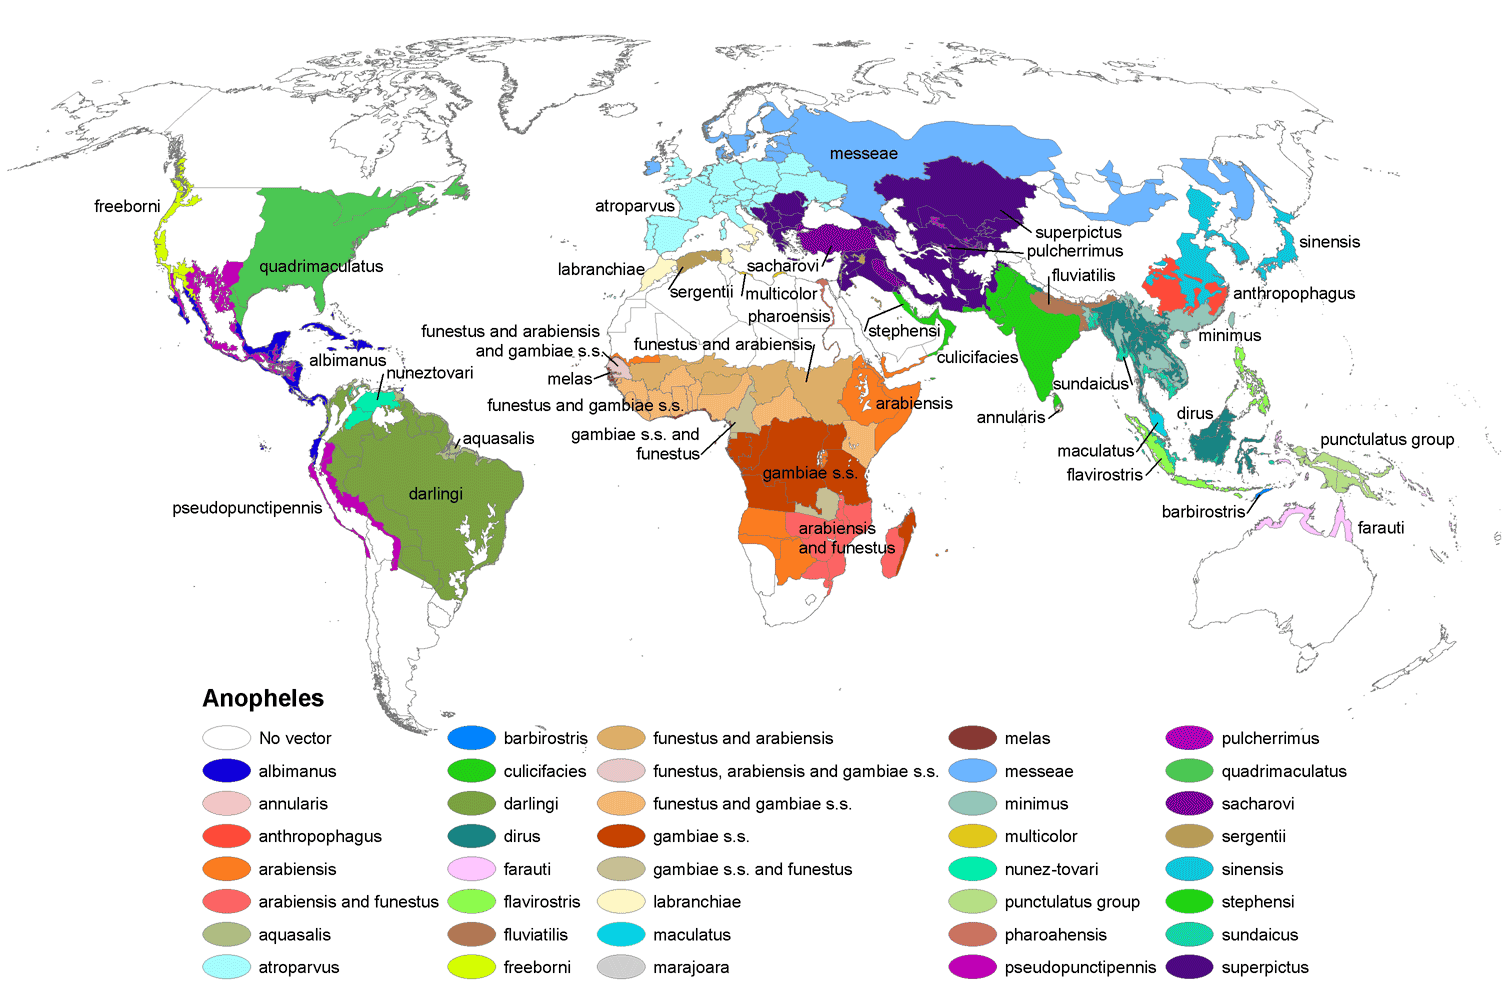 Global distribution (Robinson projection) of dominant or potentially important malaria vectors